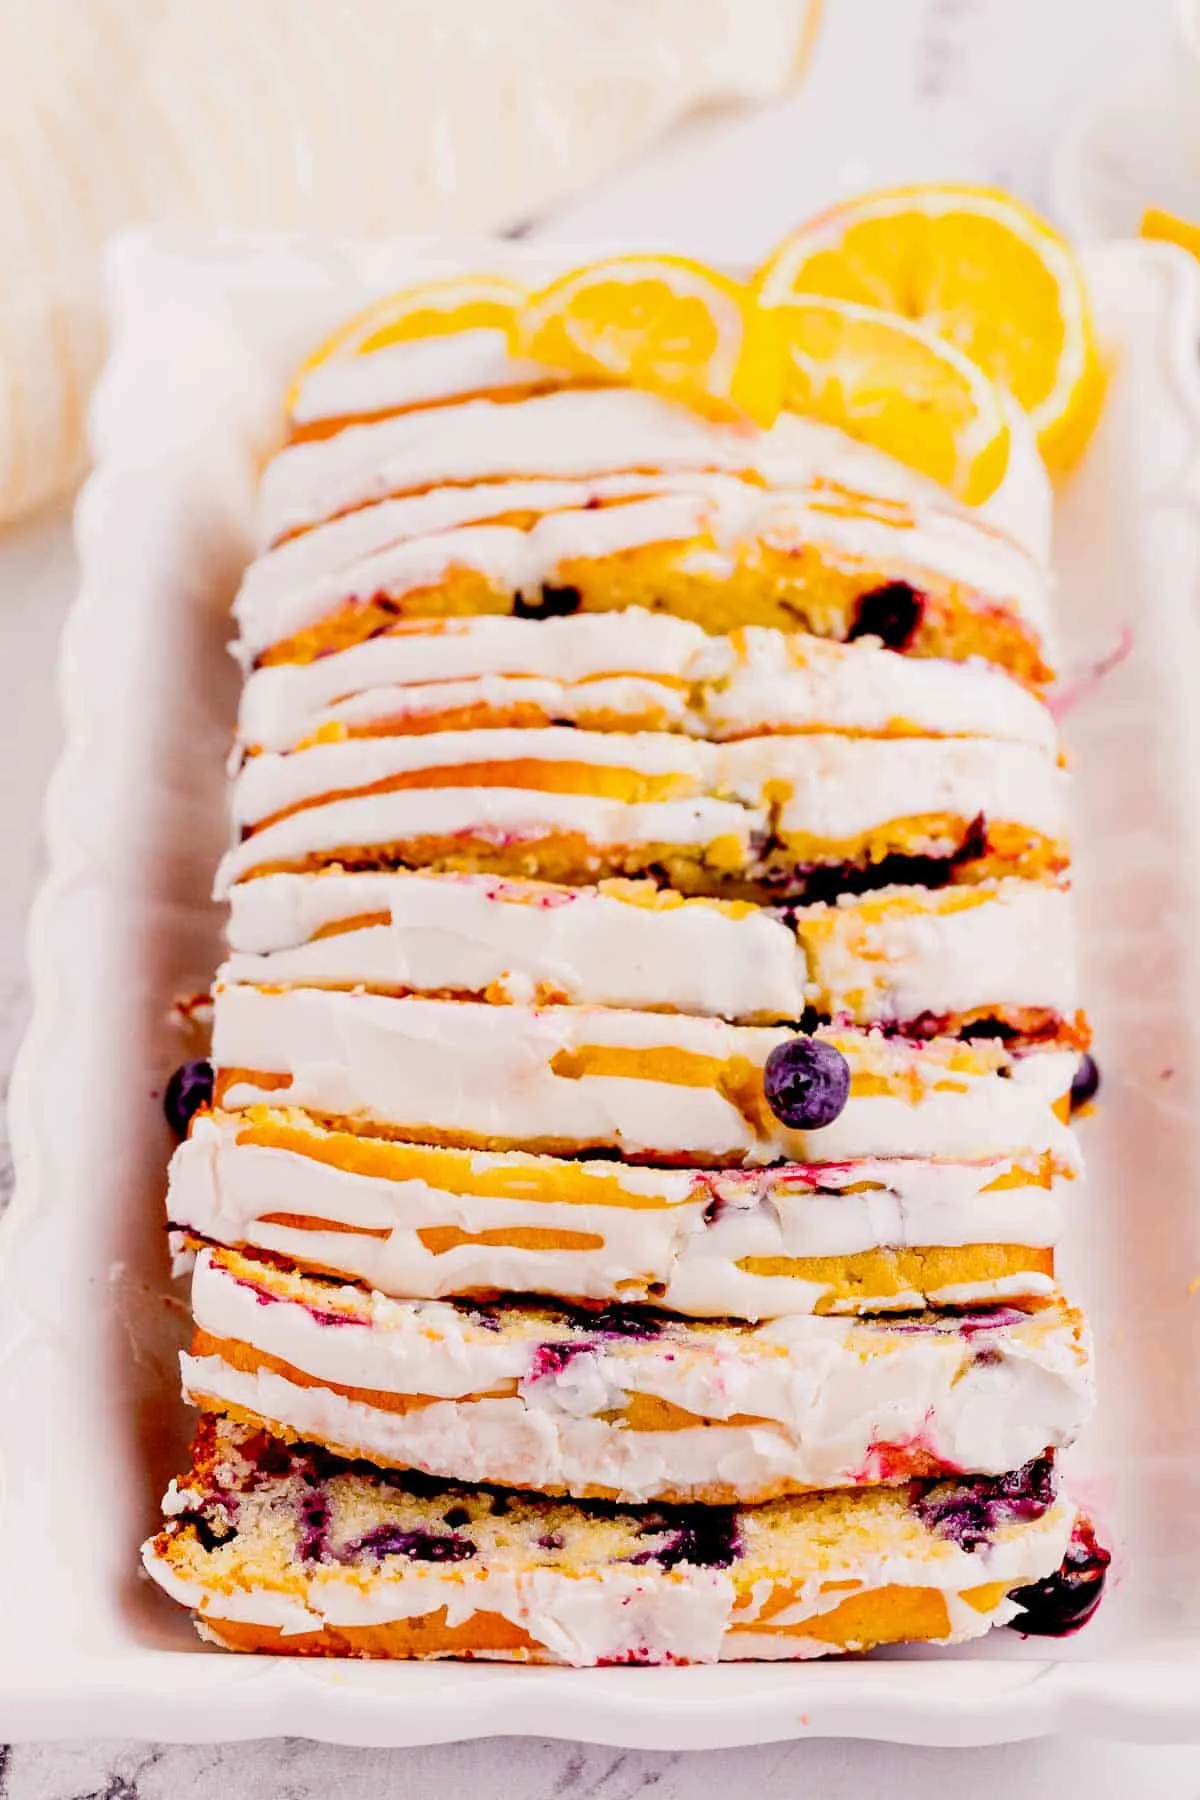 Lemon Blueberry Loaf is a delicious baked treat that combines the tangy flavor of lemons with the sweet burst of blueberries and is perfect for serving at brunch or as a dessert.